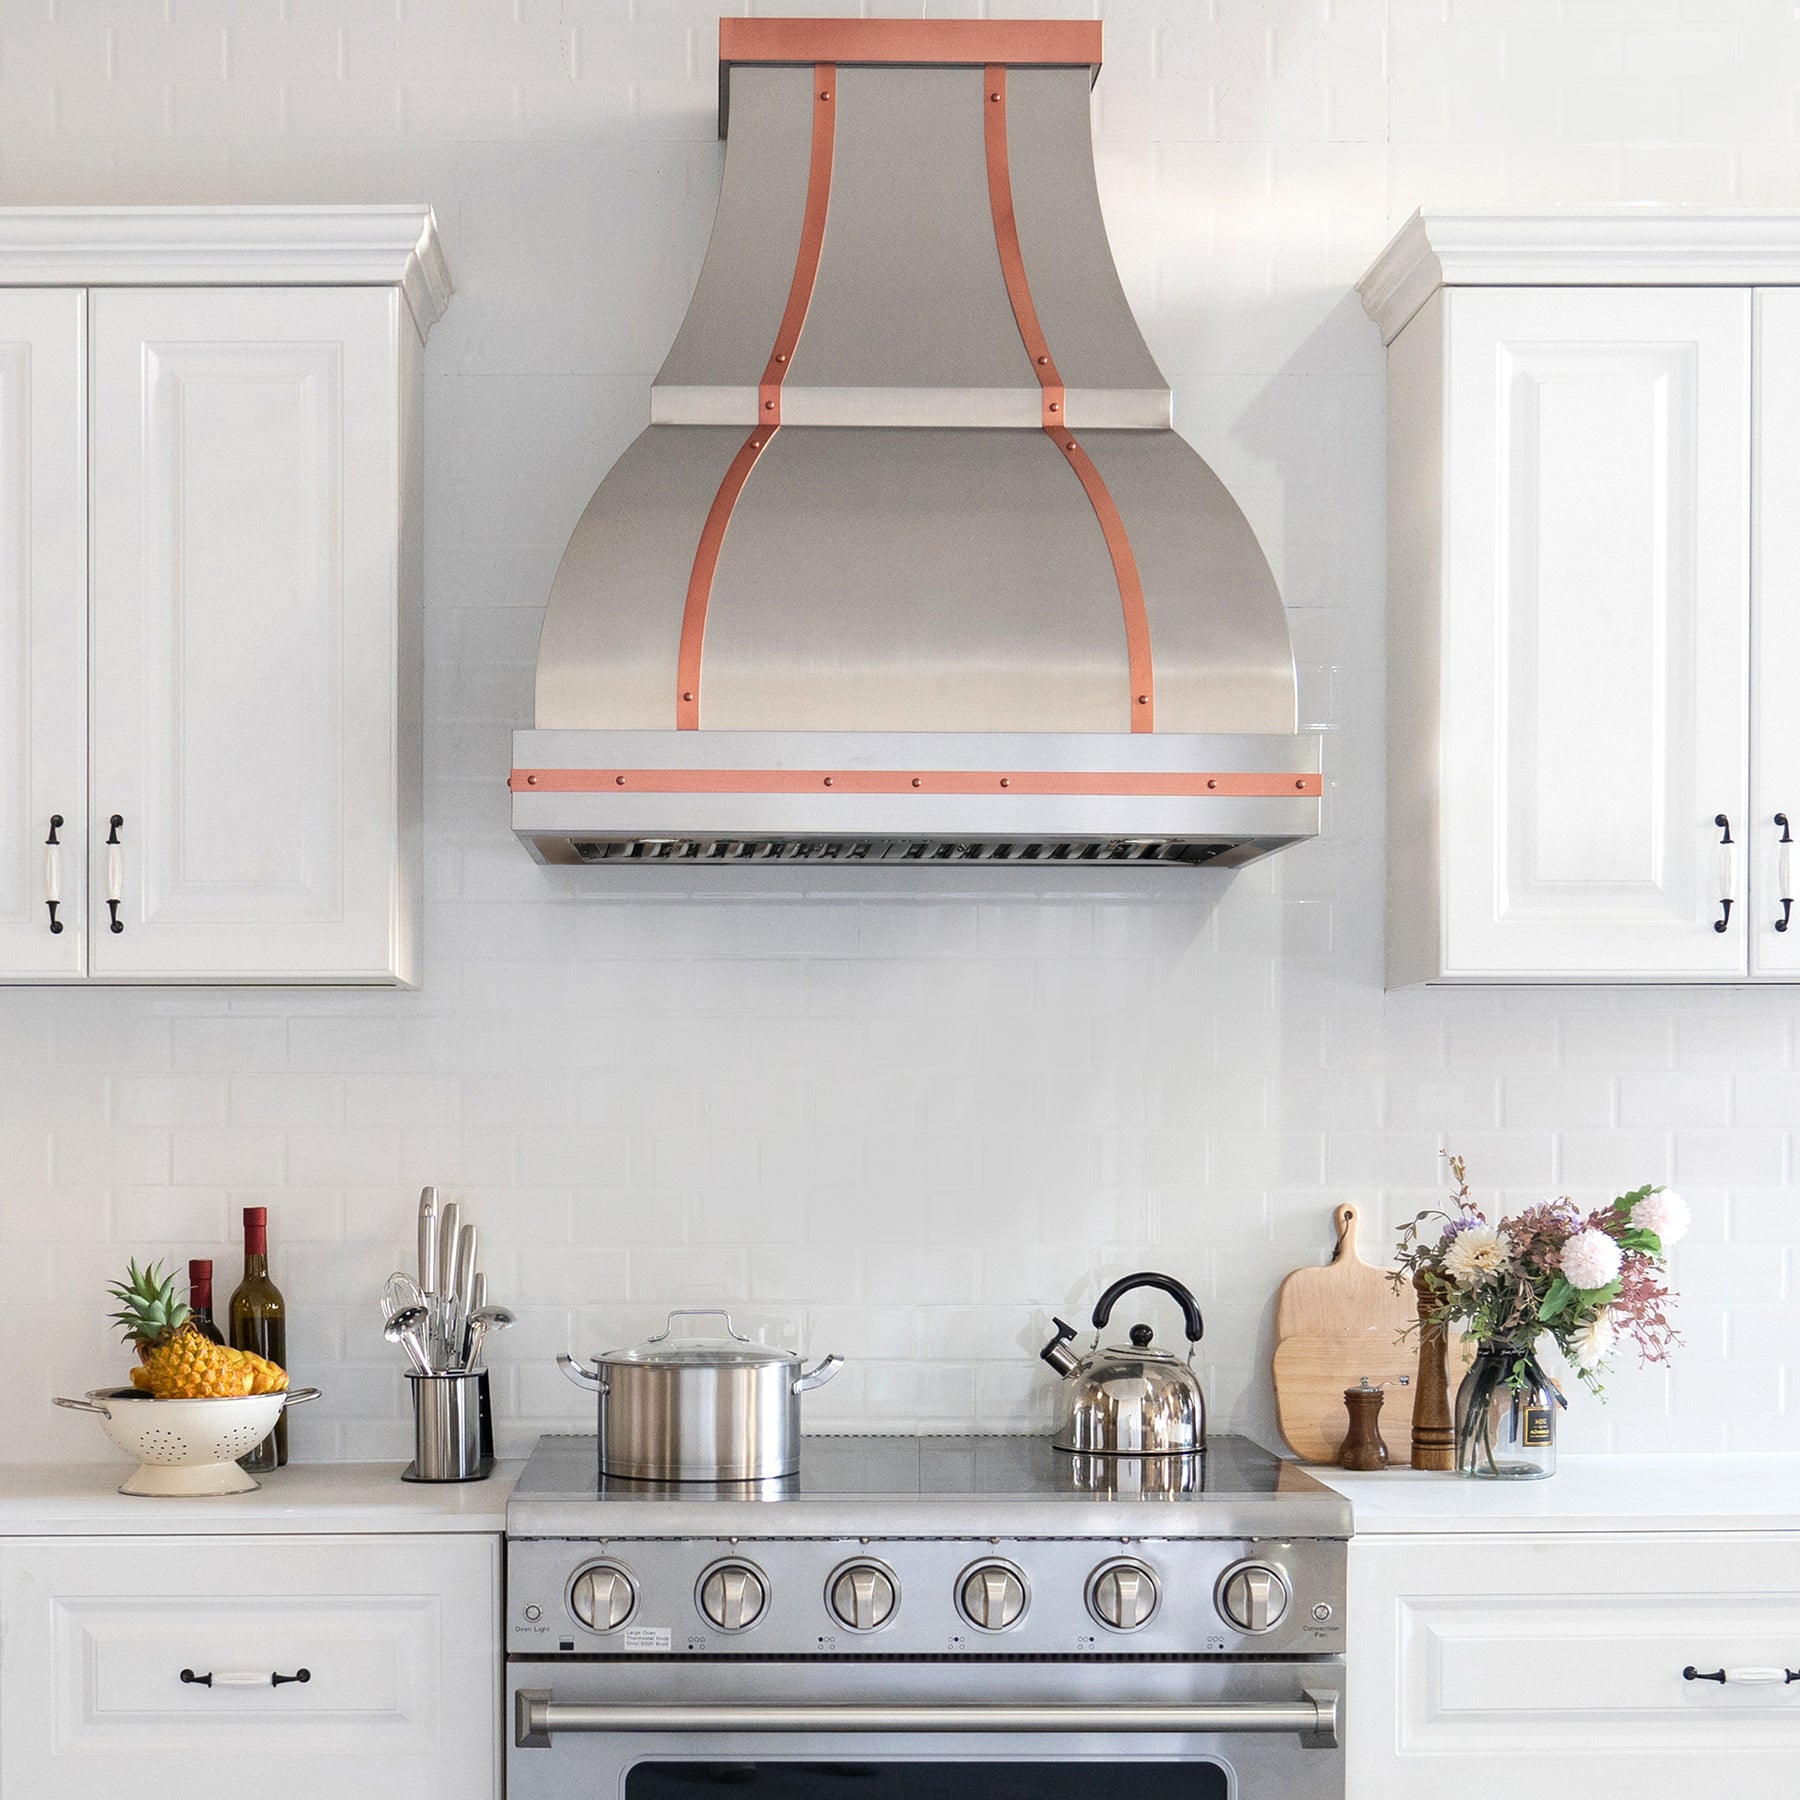 Fobest Custom stainless steel range hood with natural copper straps